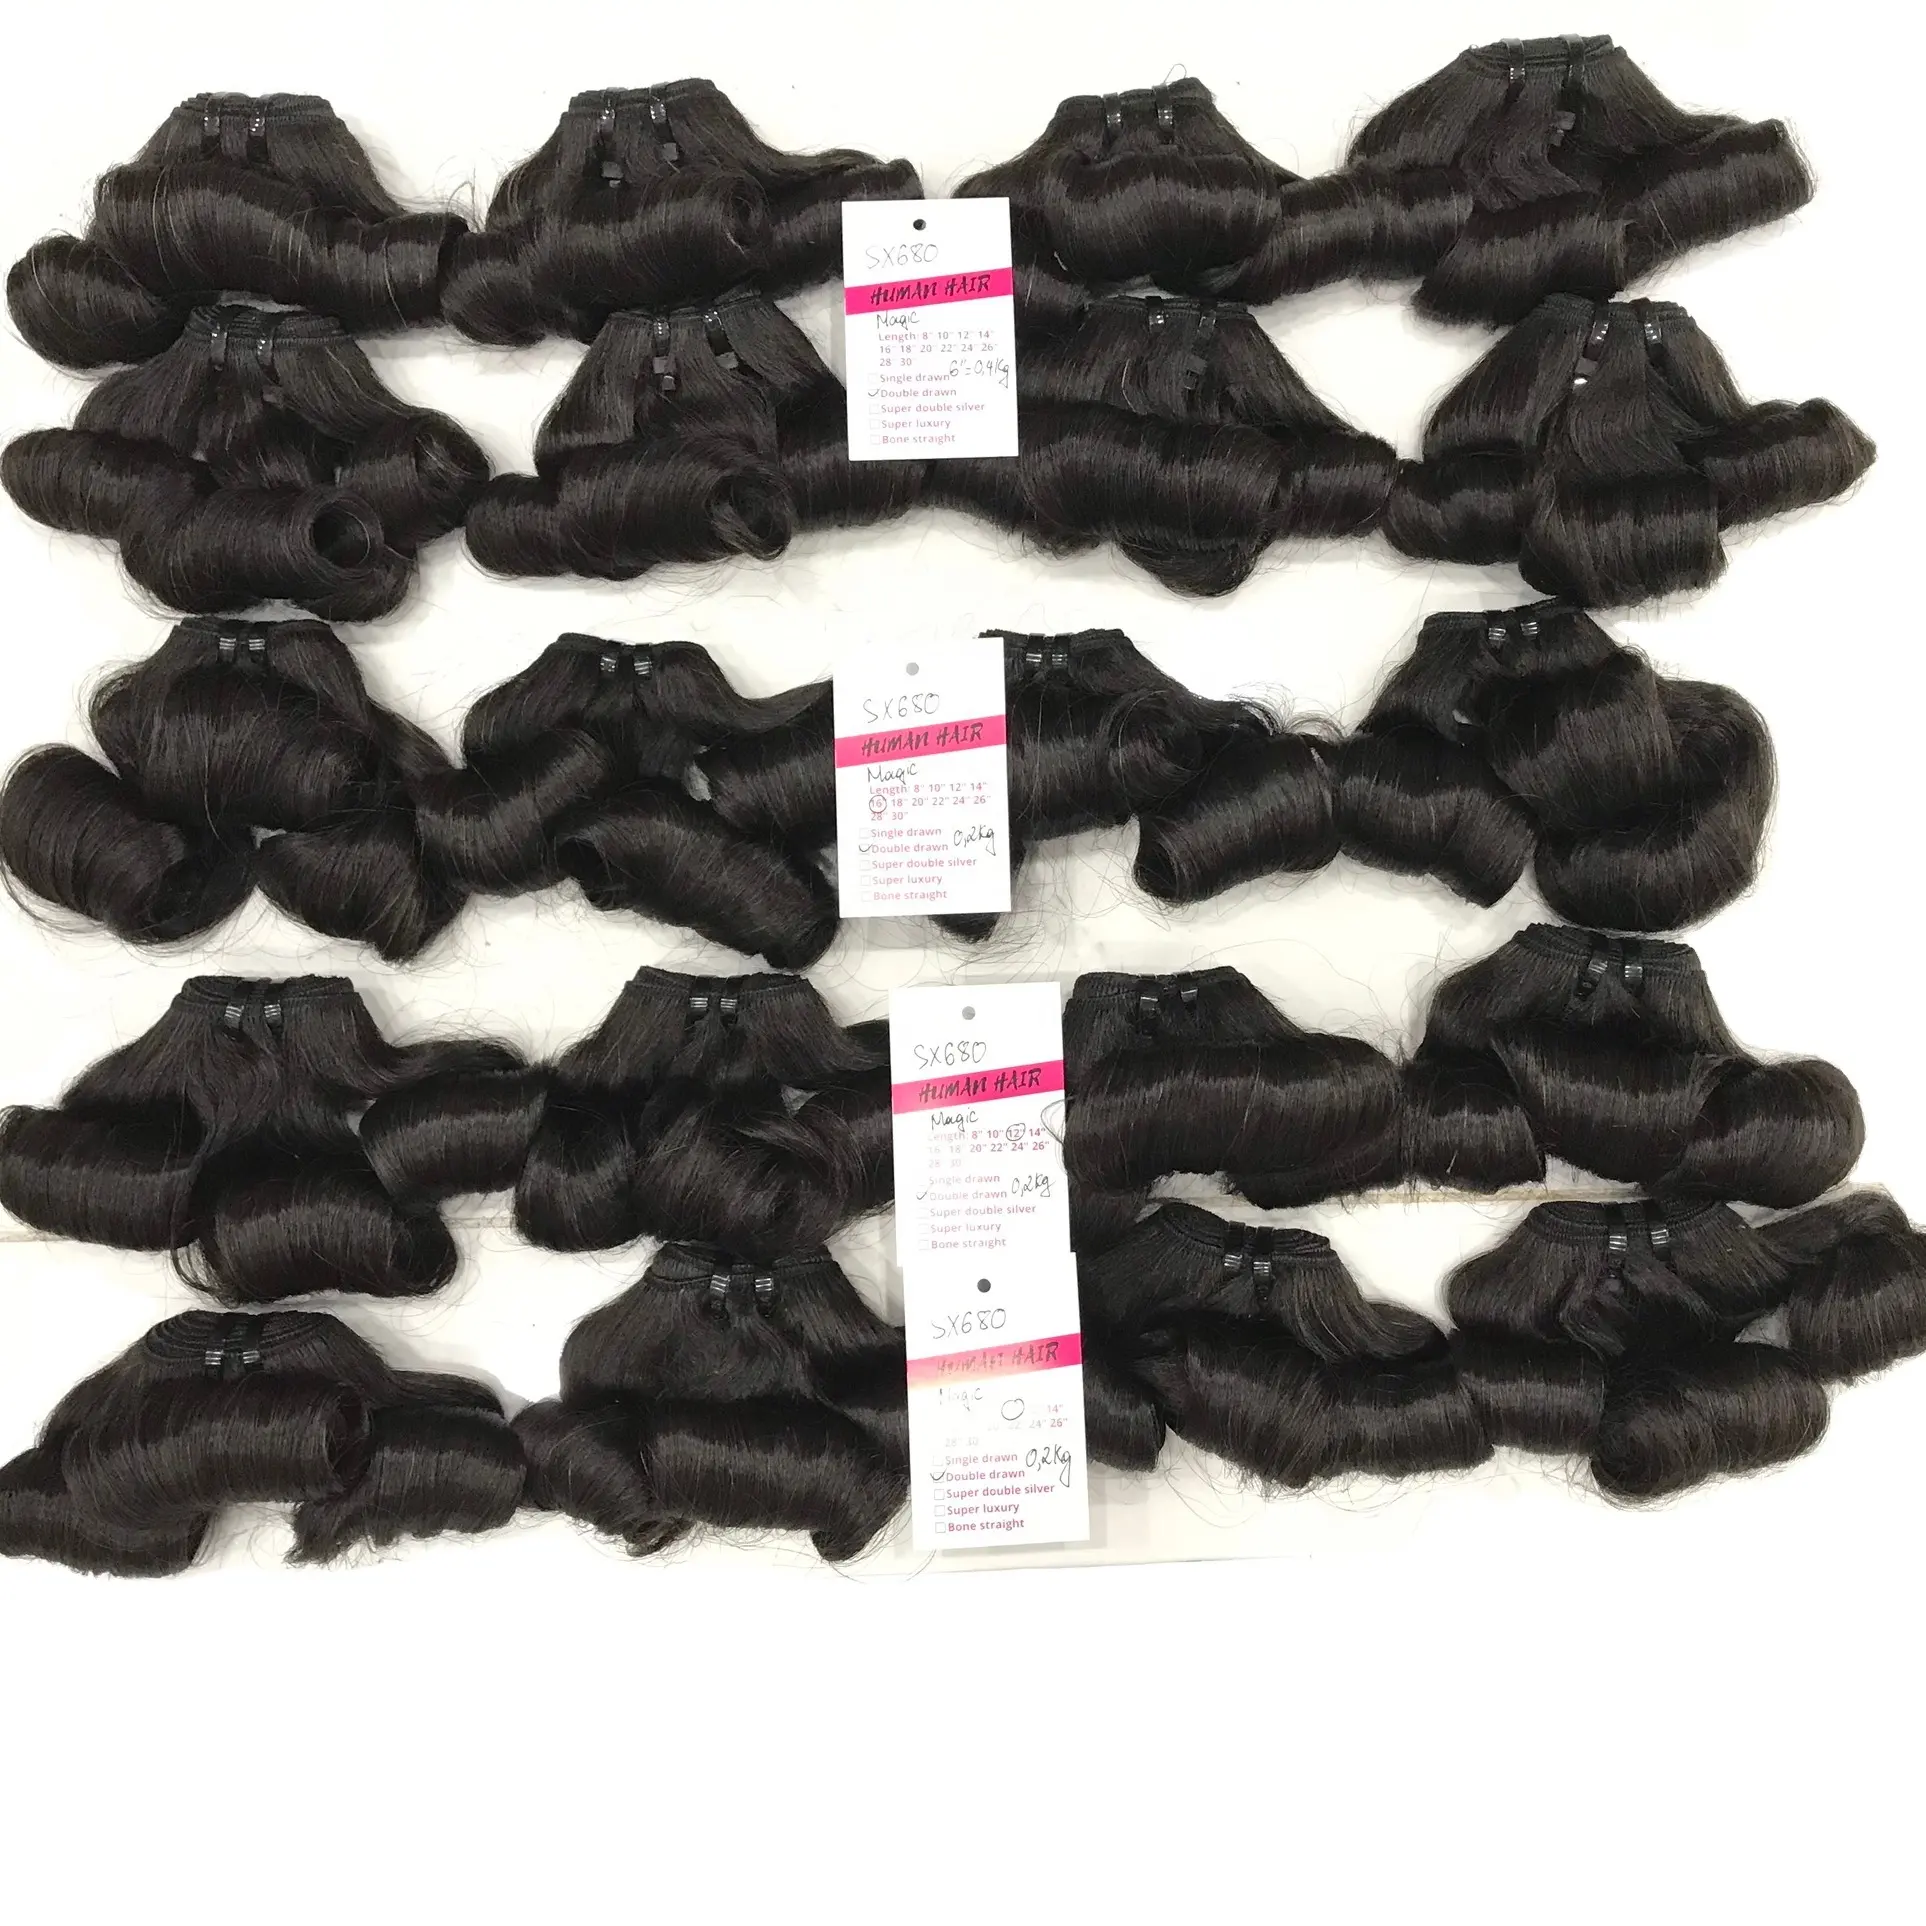 Droshipping Wholesale Black Magic Curly Weft Hair Extension from 100% Vietnamese Human Hair